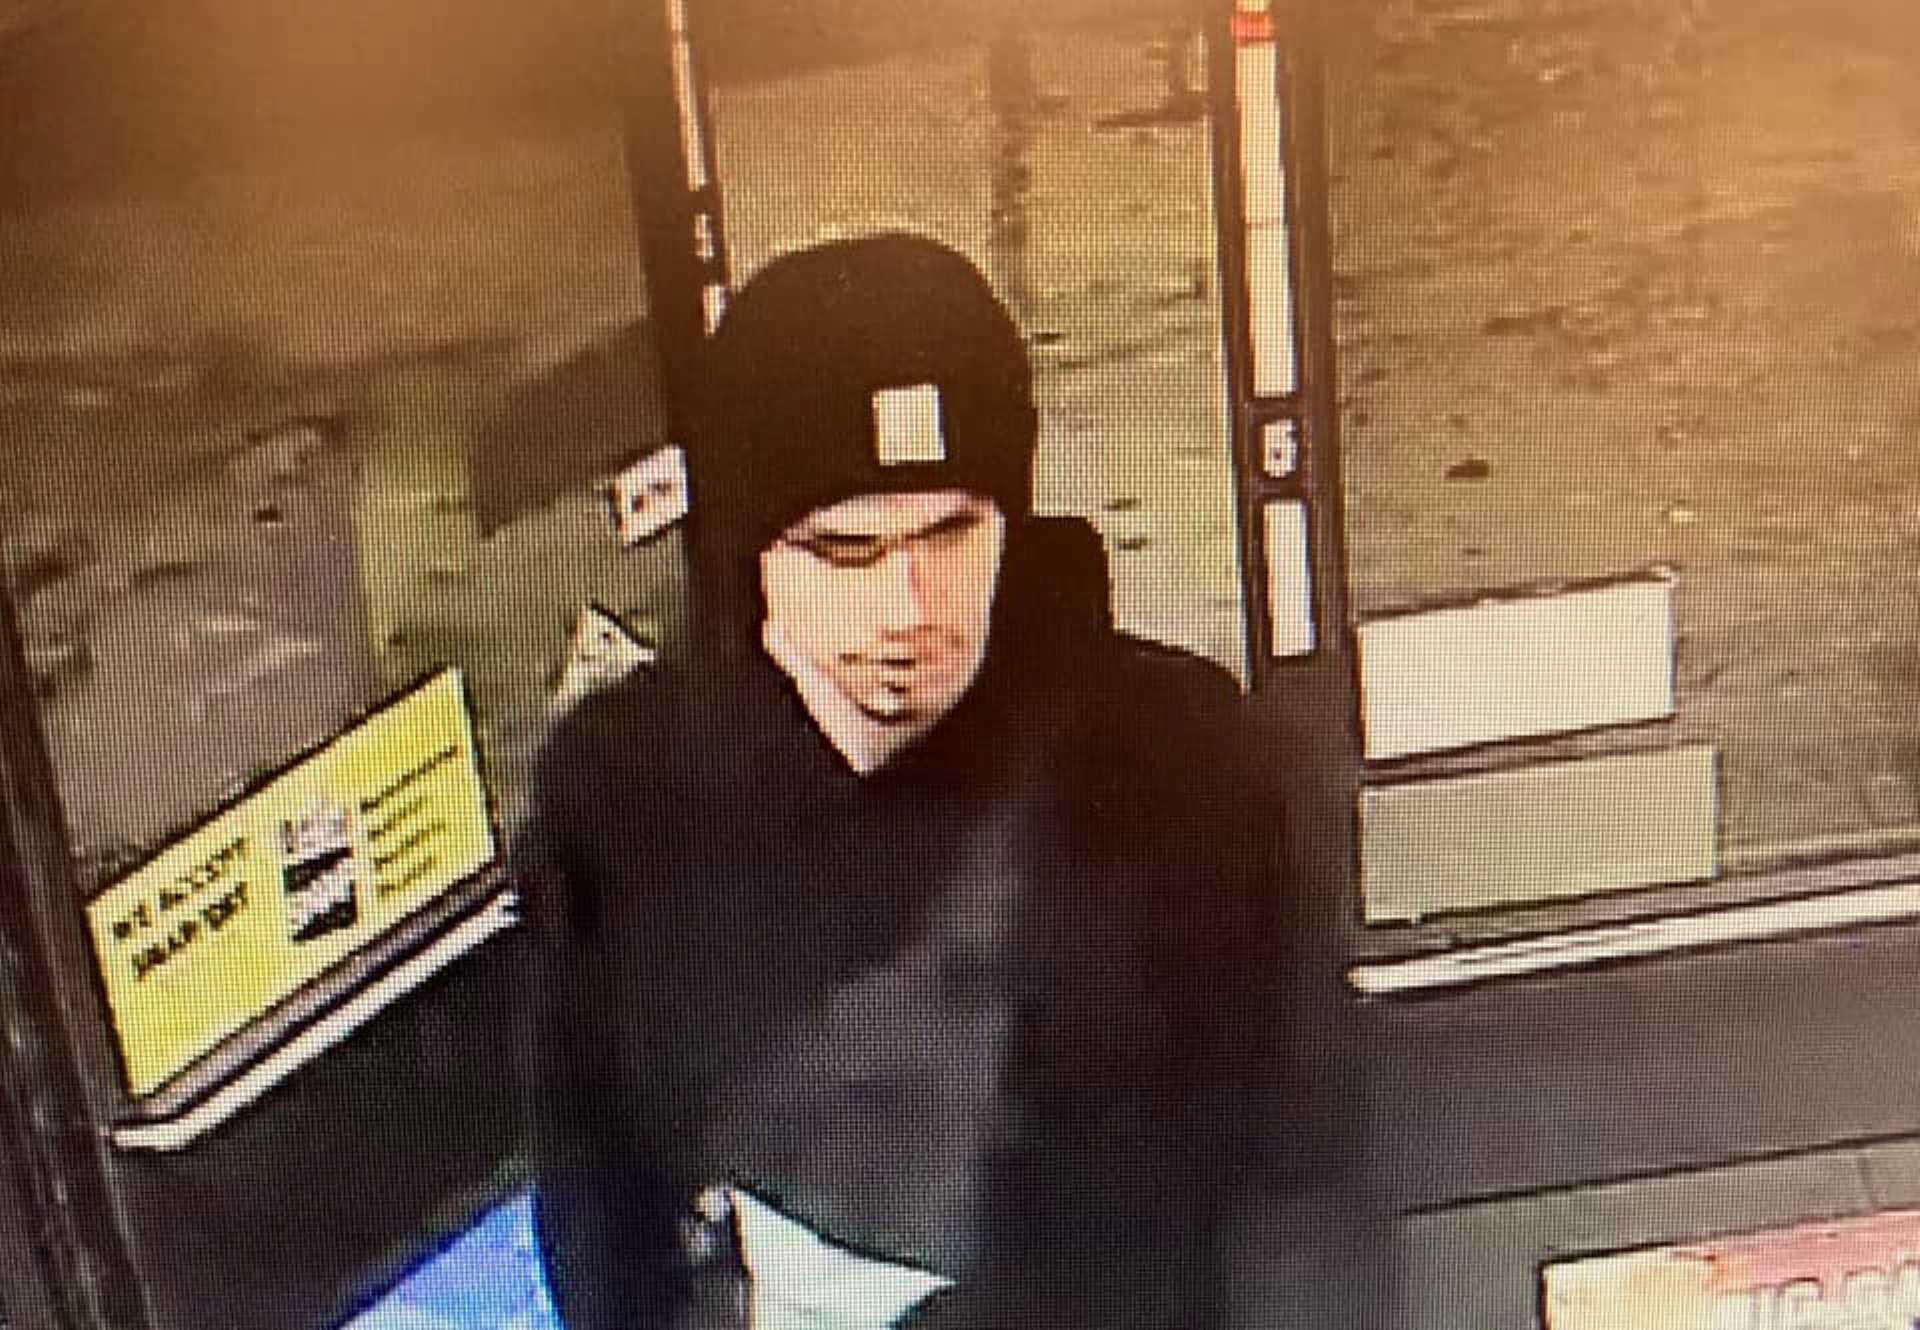 This surveillance camera image released by the Yakima Police Department in Washington state on Jan 24 reportedly shows the suspect sought by police in a shooting that left three people dead. Photo: AFP